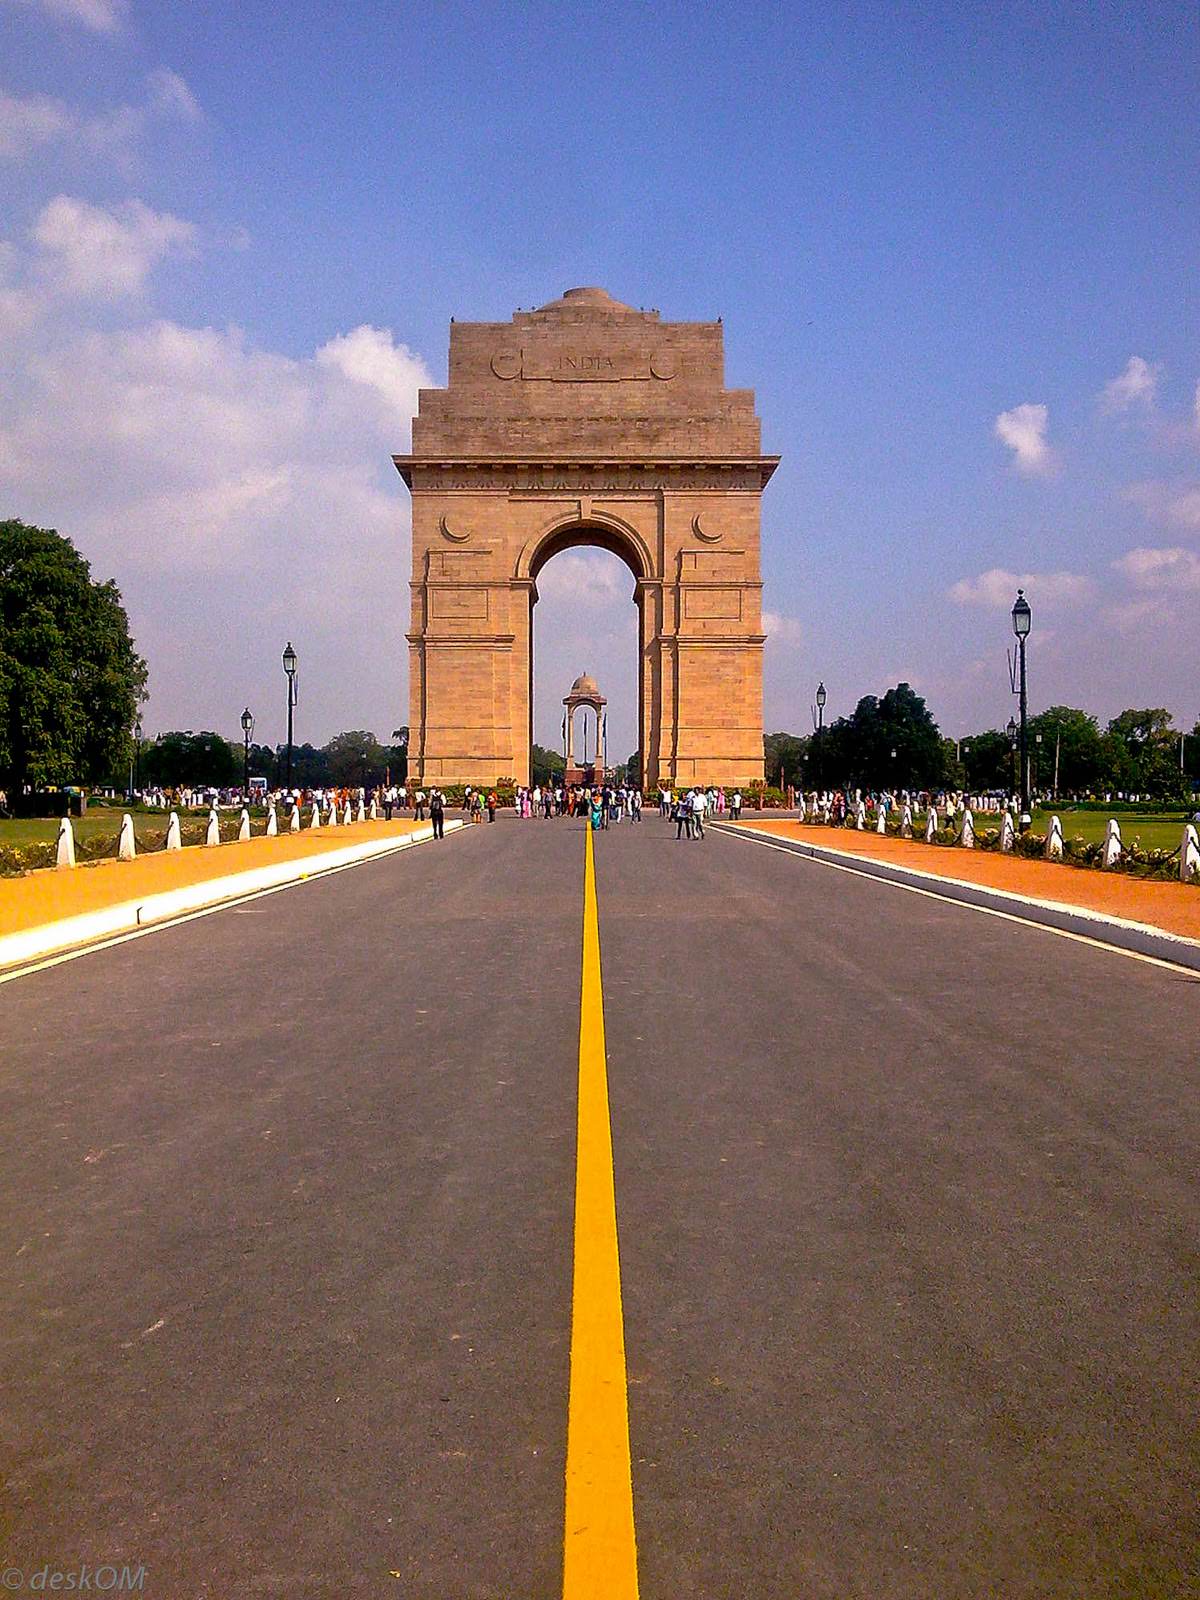 If You Want To Walk On The Way Of Kings To New Delhi